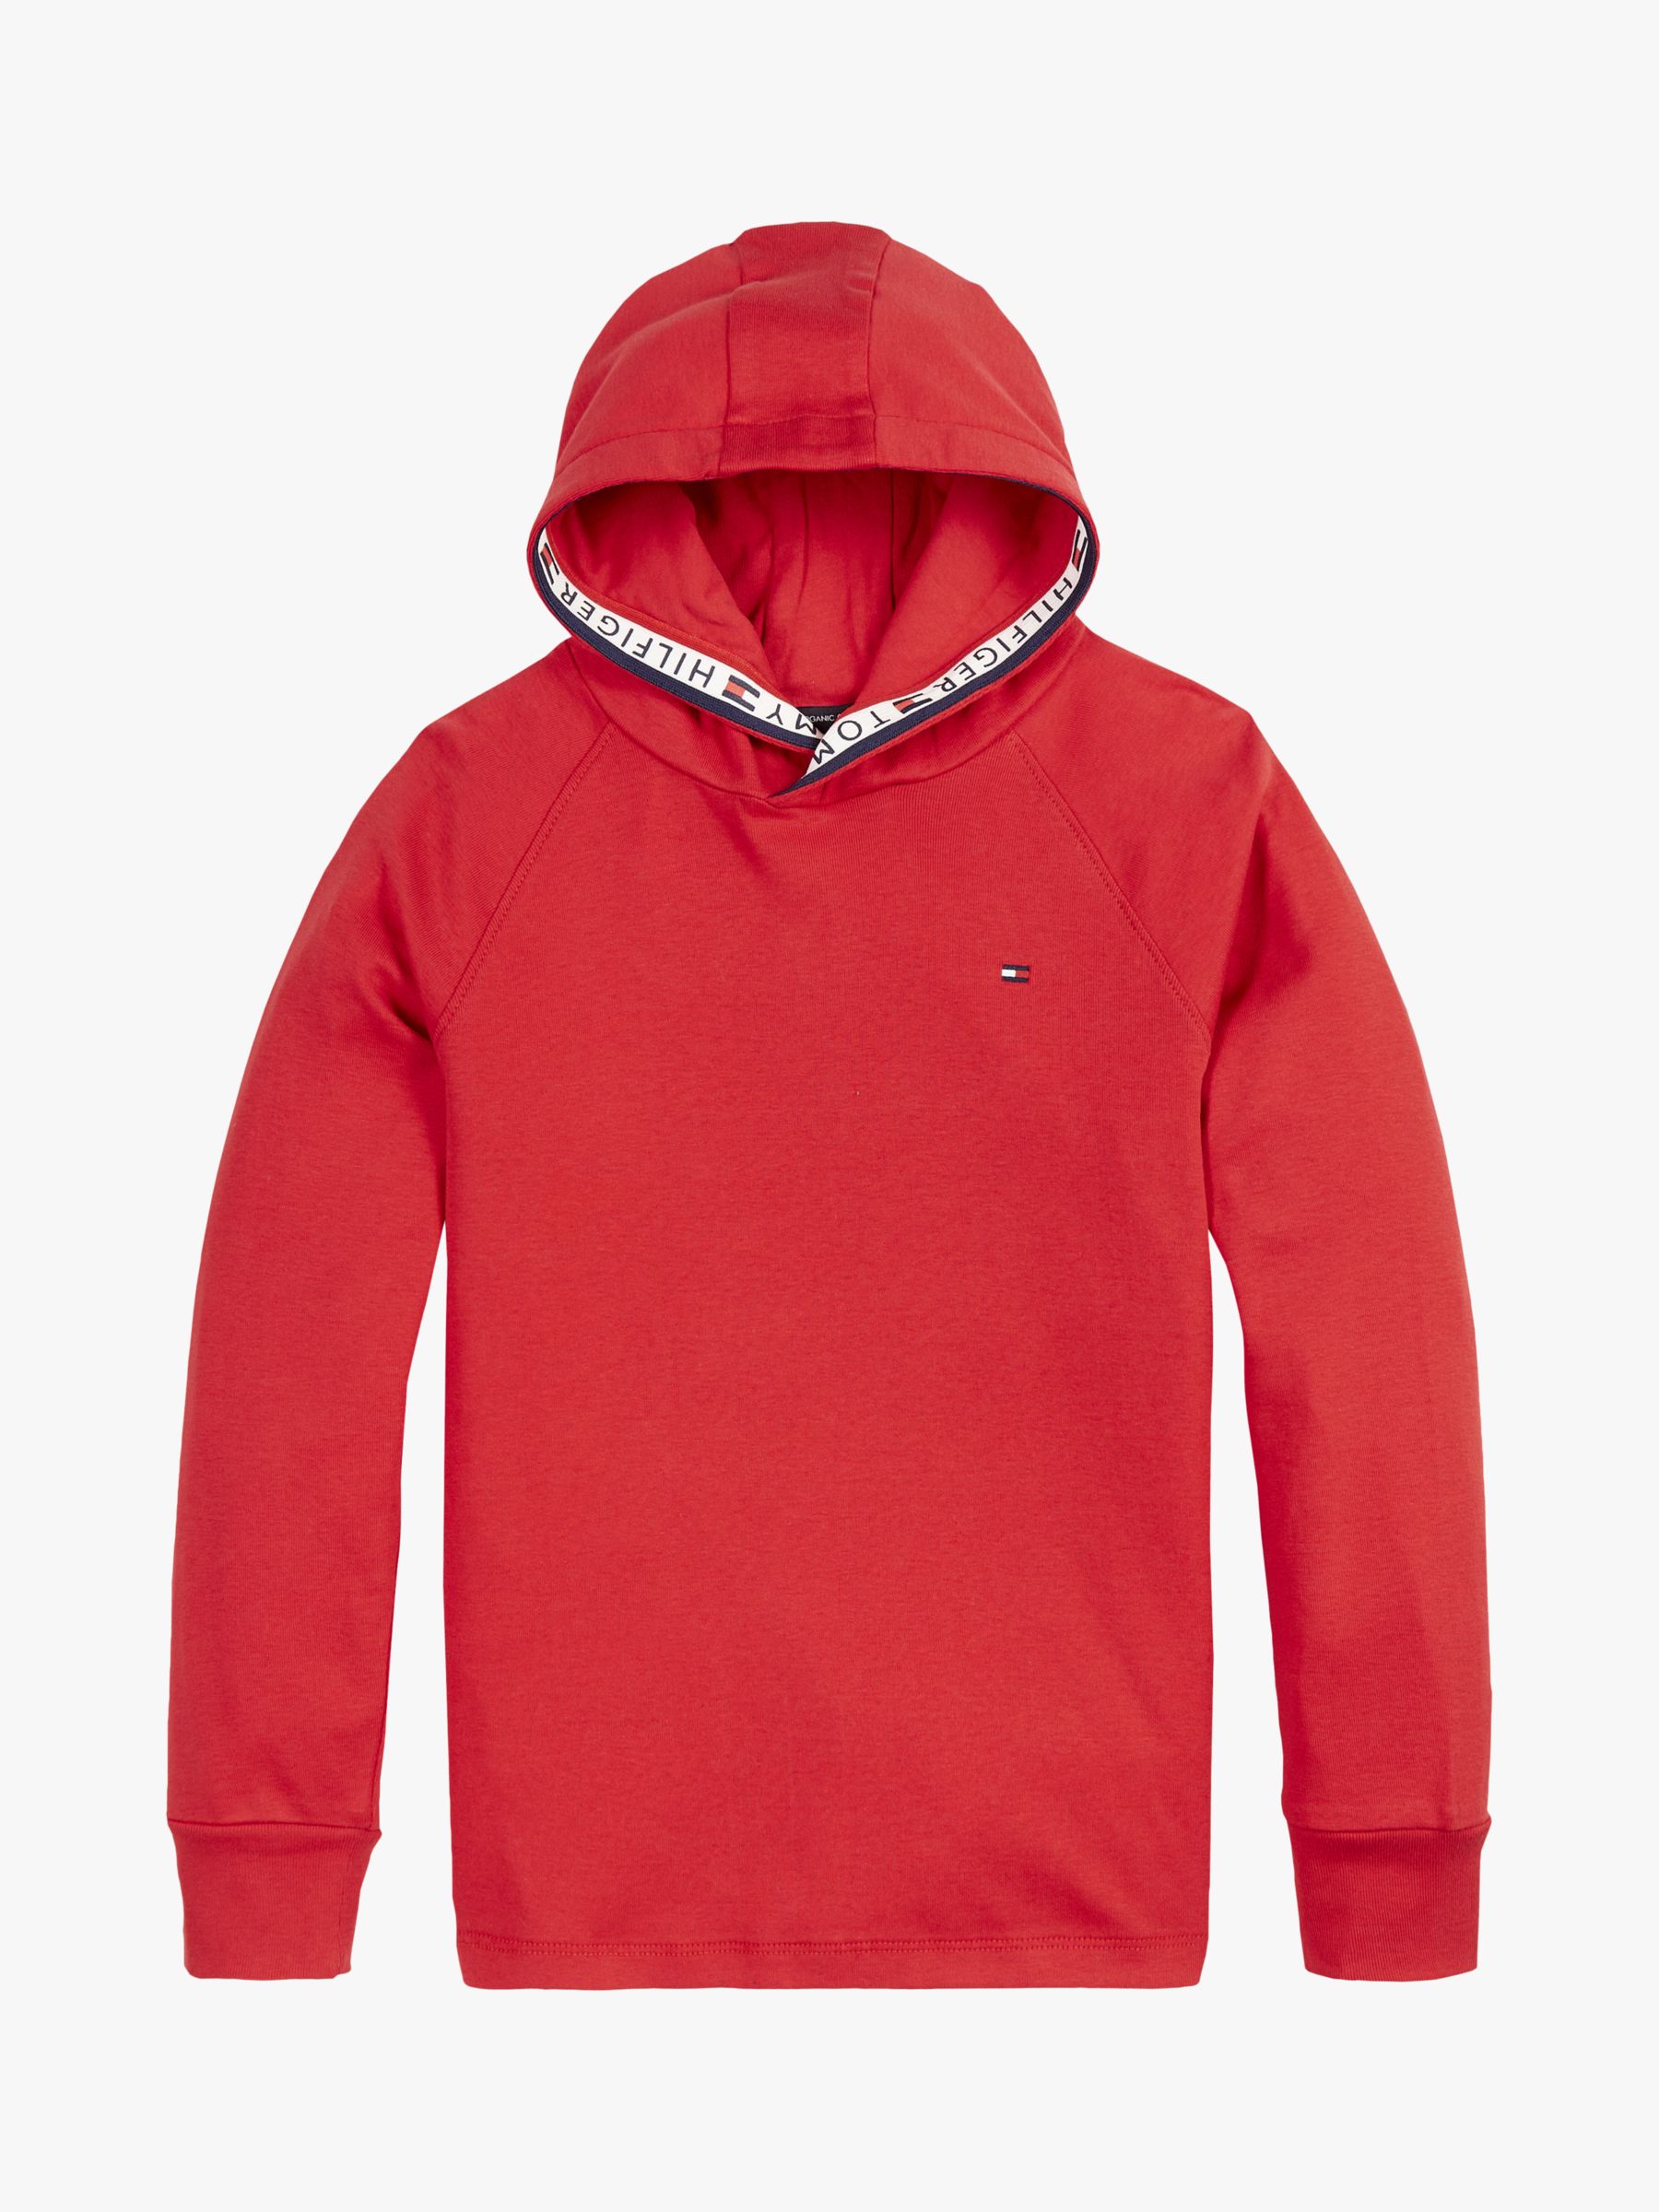 Image of Tommy Hilfiger Boys Organic Cotton Logo Tape Hoodie